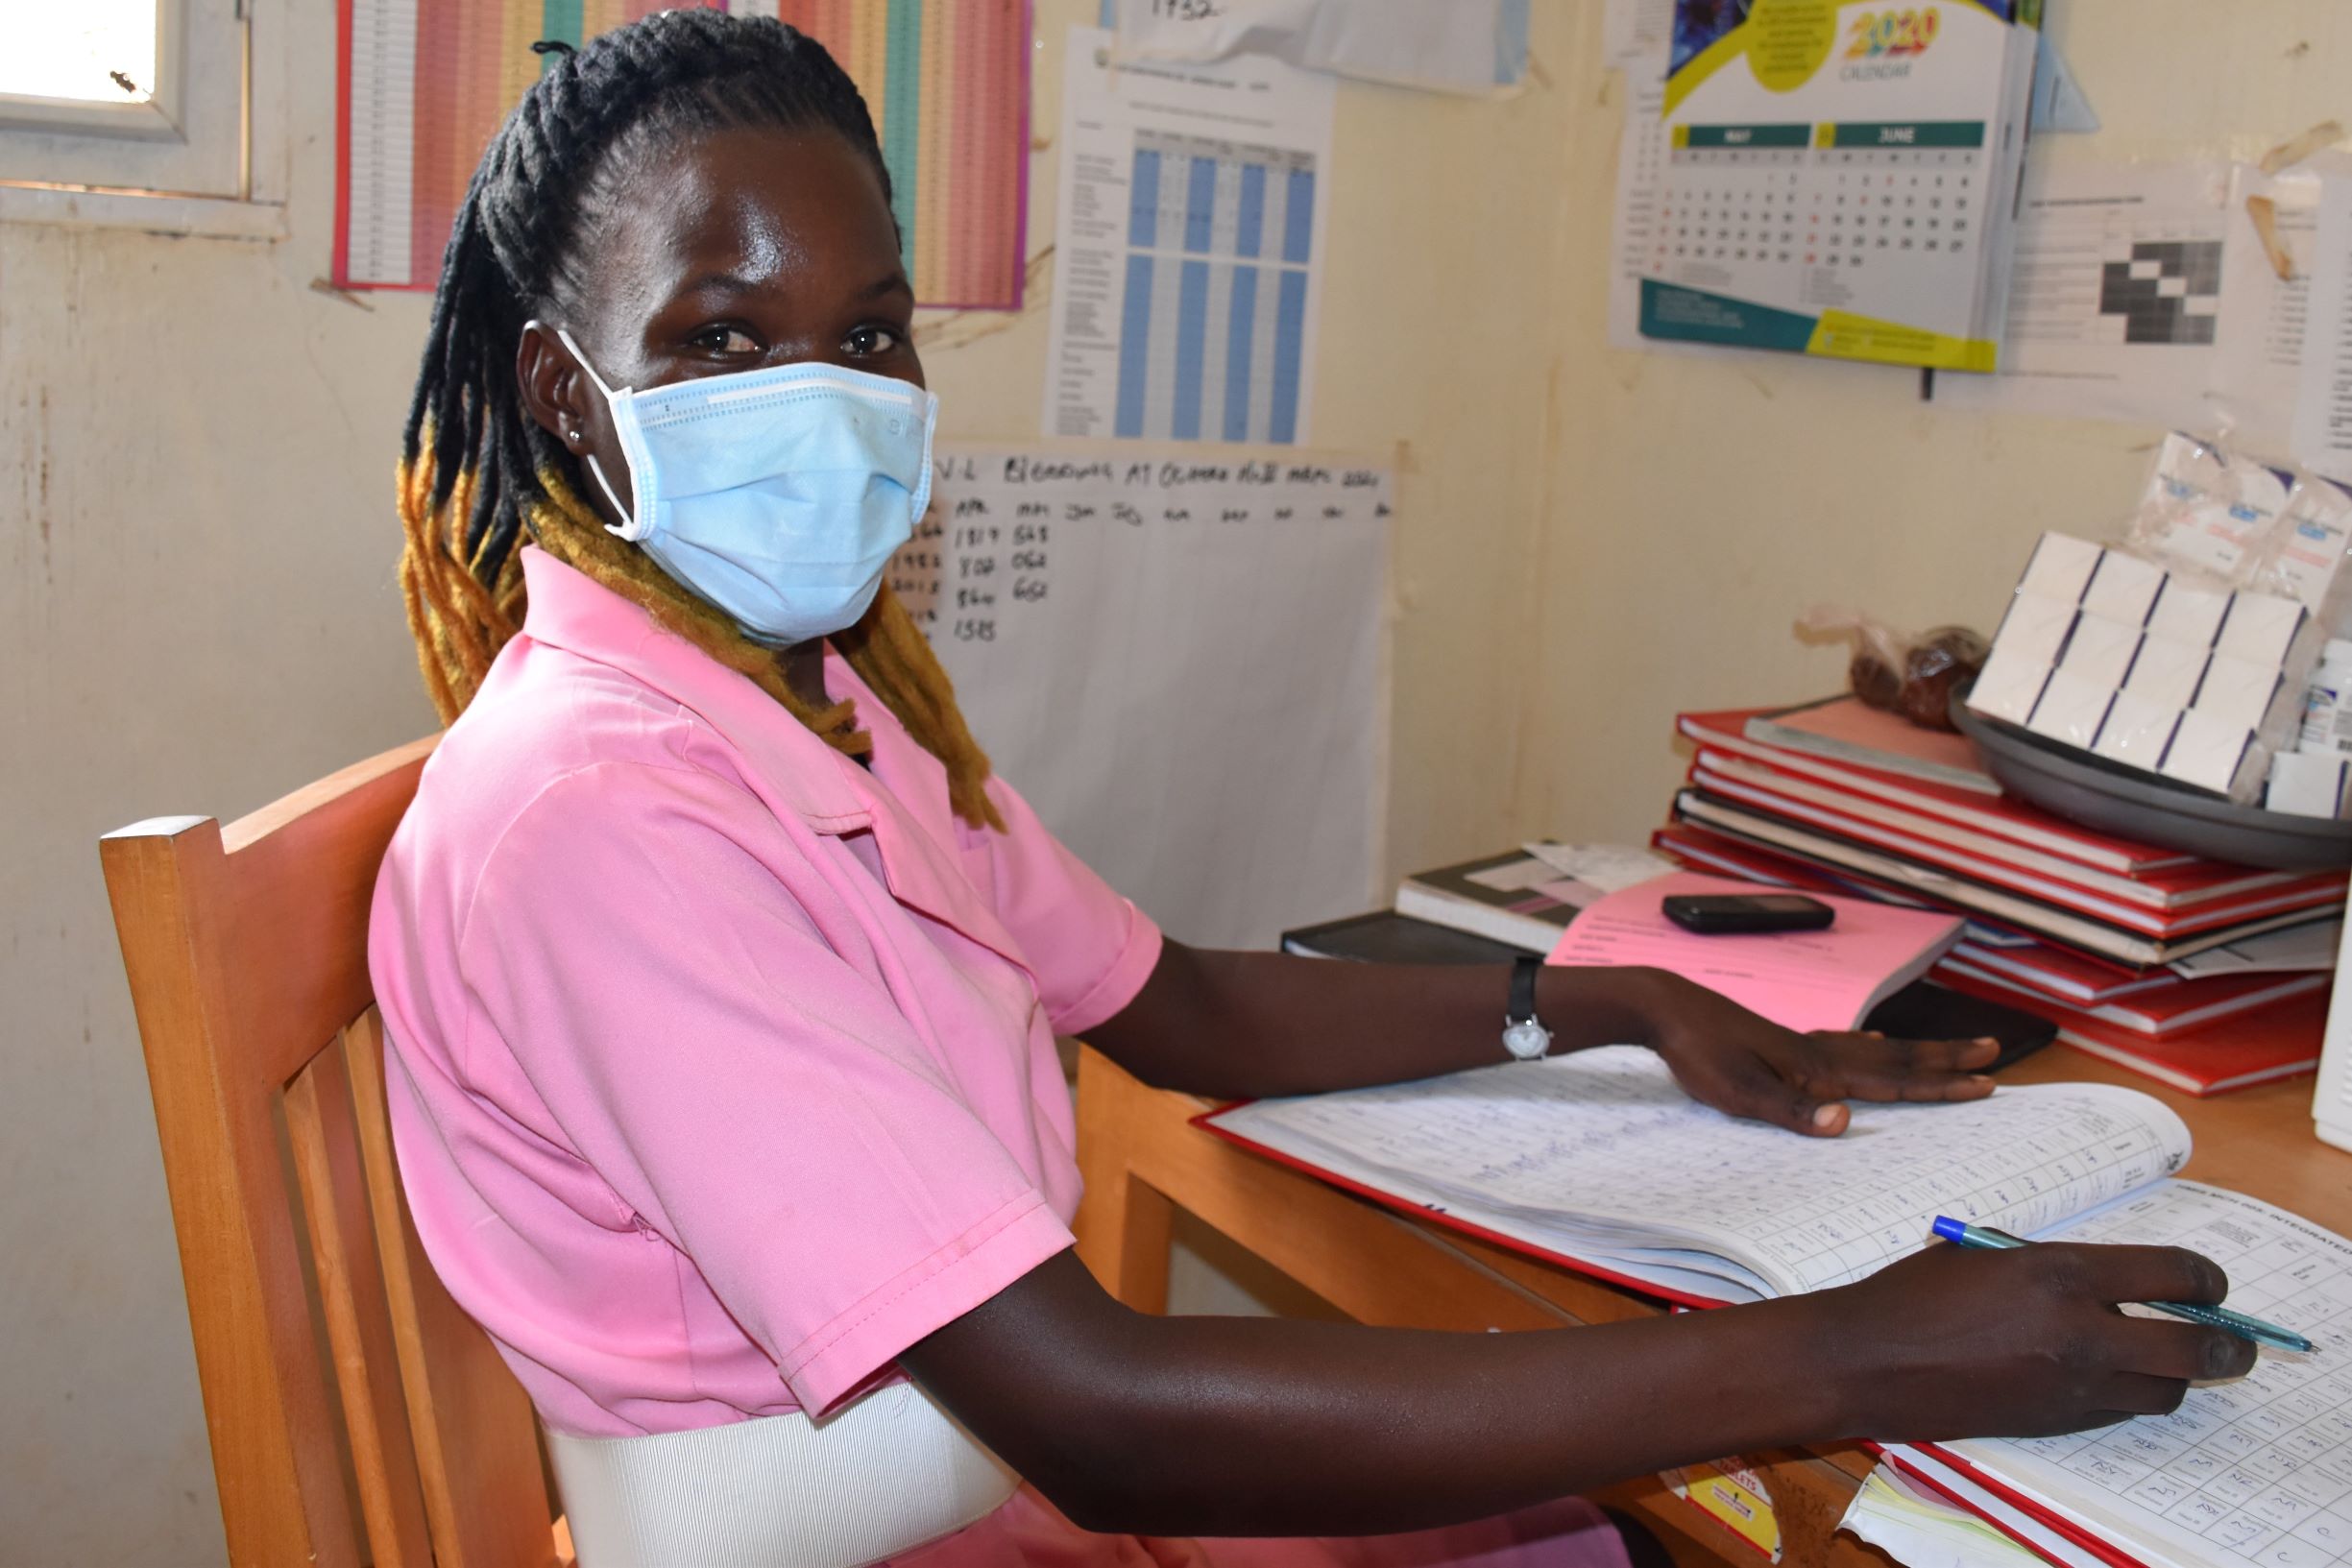 Catherine, a midwife at Ochero Health Center III, adapted quickly to continue providing high-quality maternal and child health services to mothers who come to the health center. Photo by Irene Mirembe for IntraHealth International.